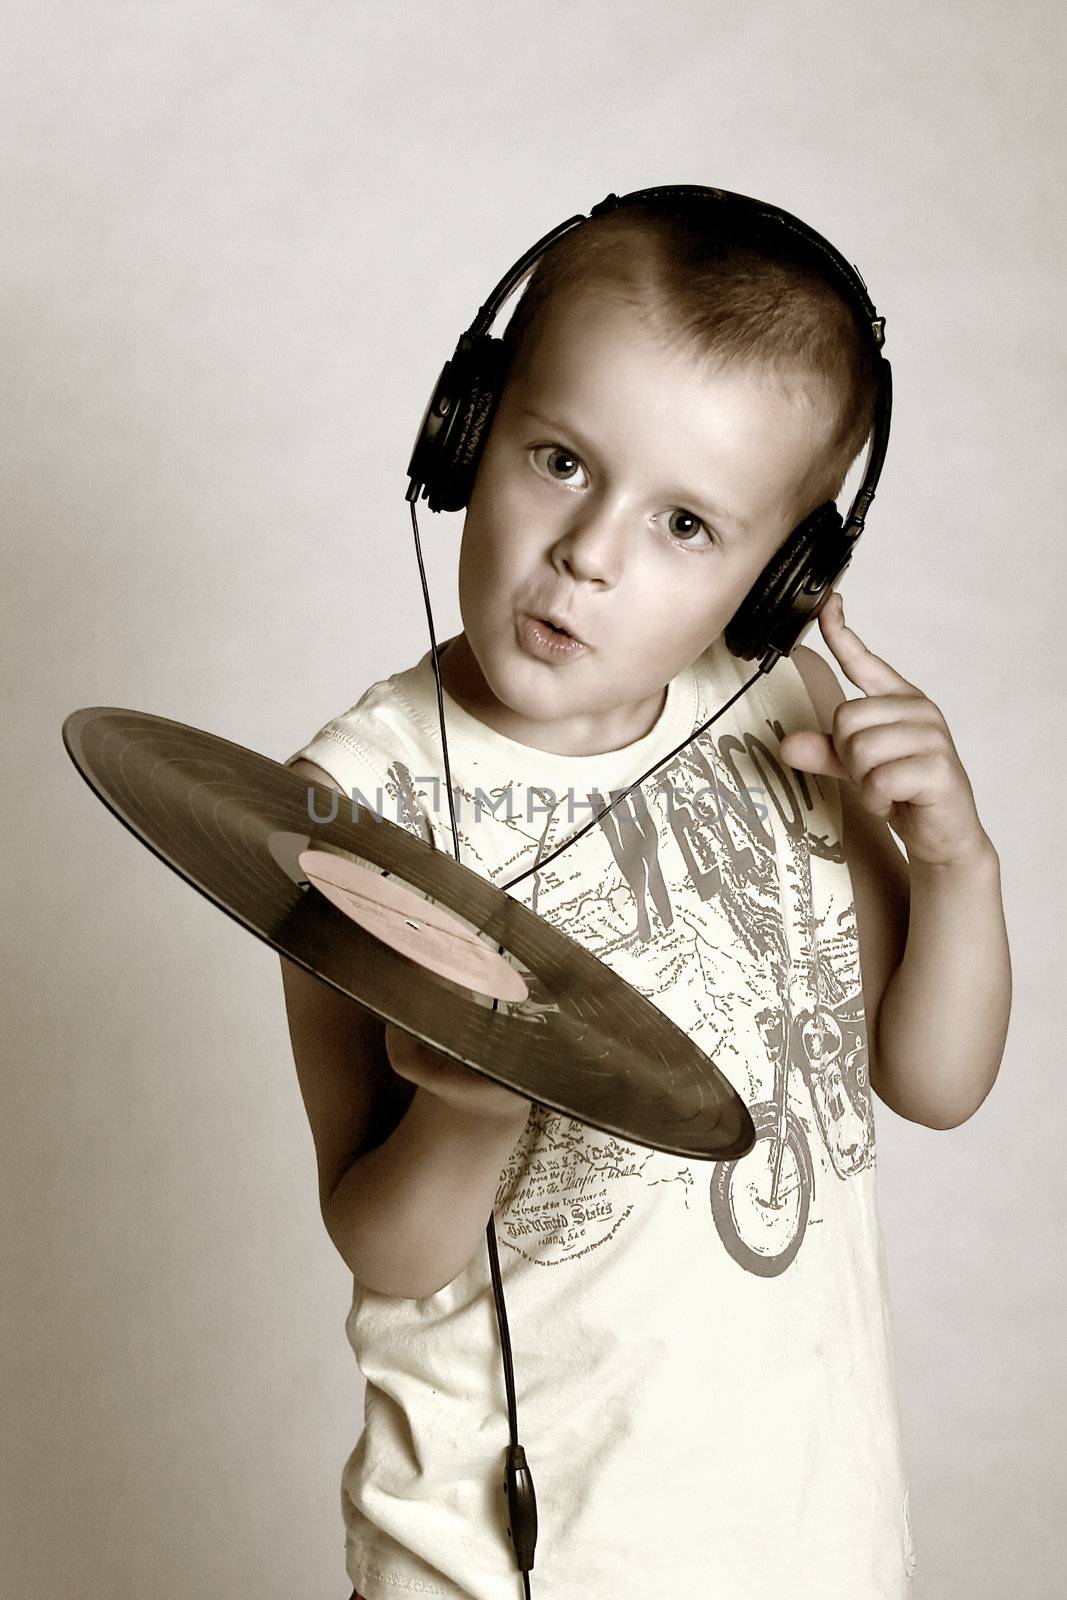 Child in headphones with grame playing dj